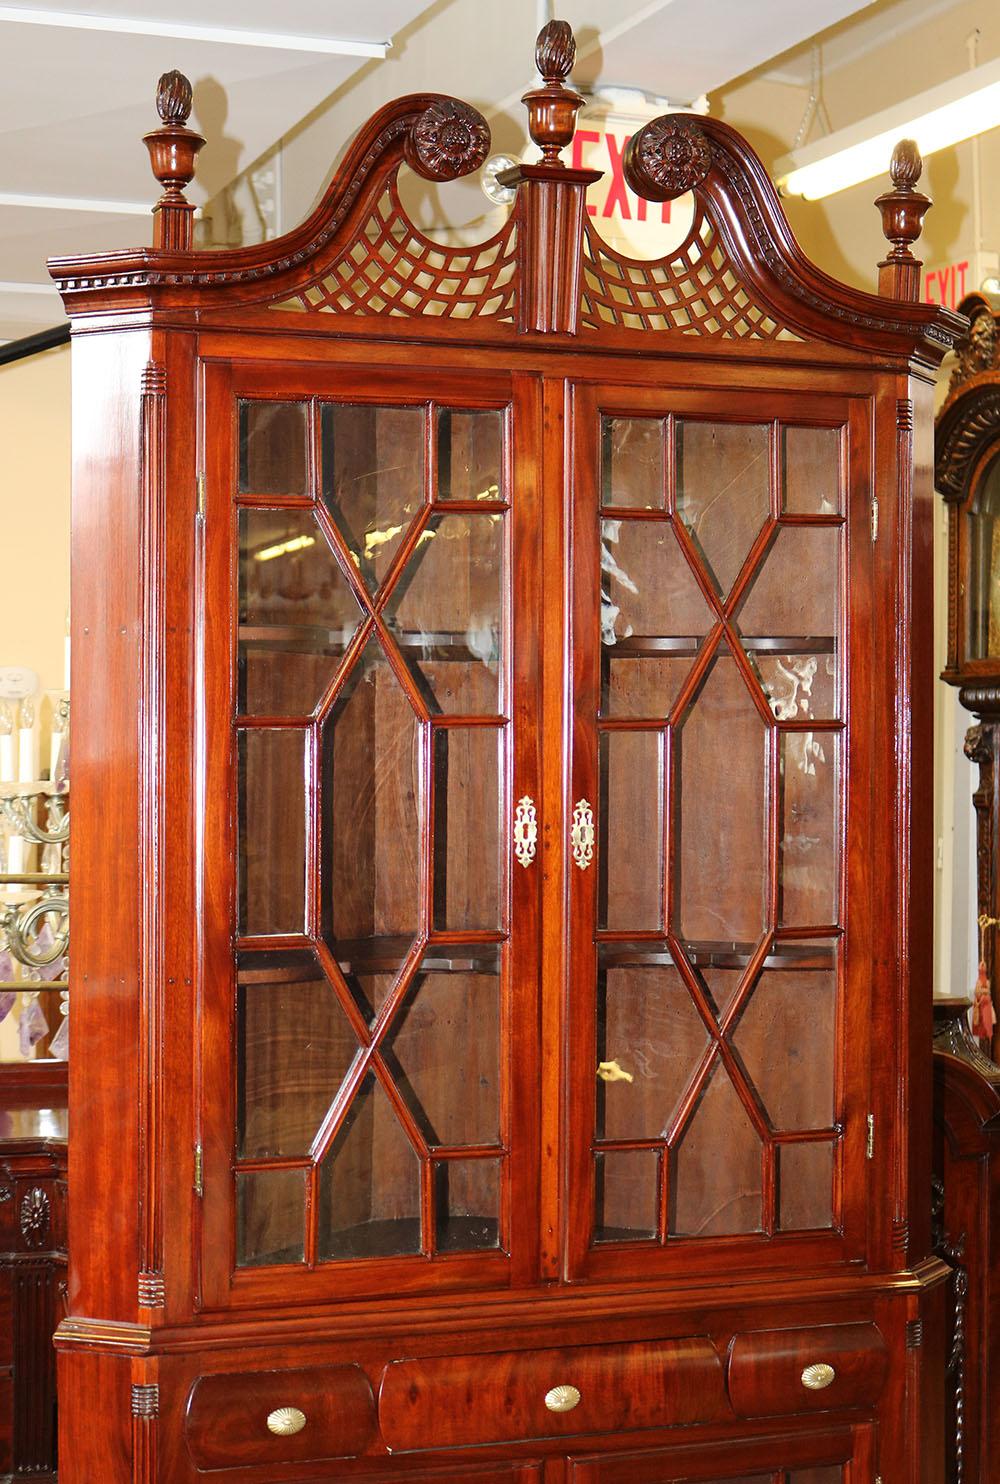 1890s Era Solid Mahogany Chippendale Corner Cabinet Cupboard Hand Blown Glass

Measures 44 wide x 93 tall  x 22 deep

 sides 30 inches against wall

This 2 piece corner cabinet is designed in the Federal or Chippendale style and appears to have